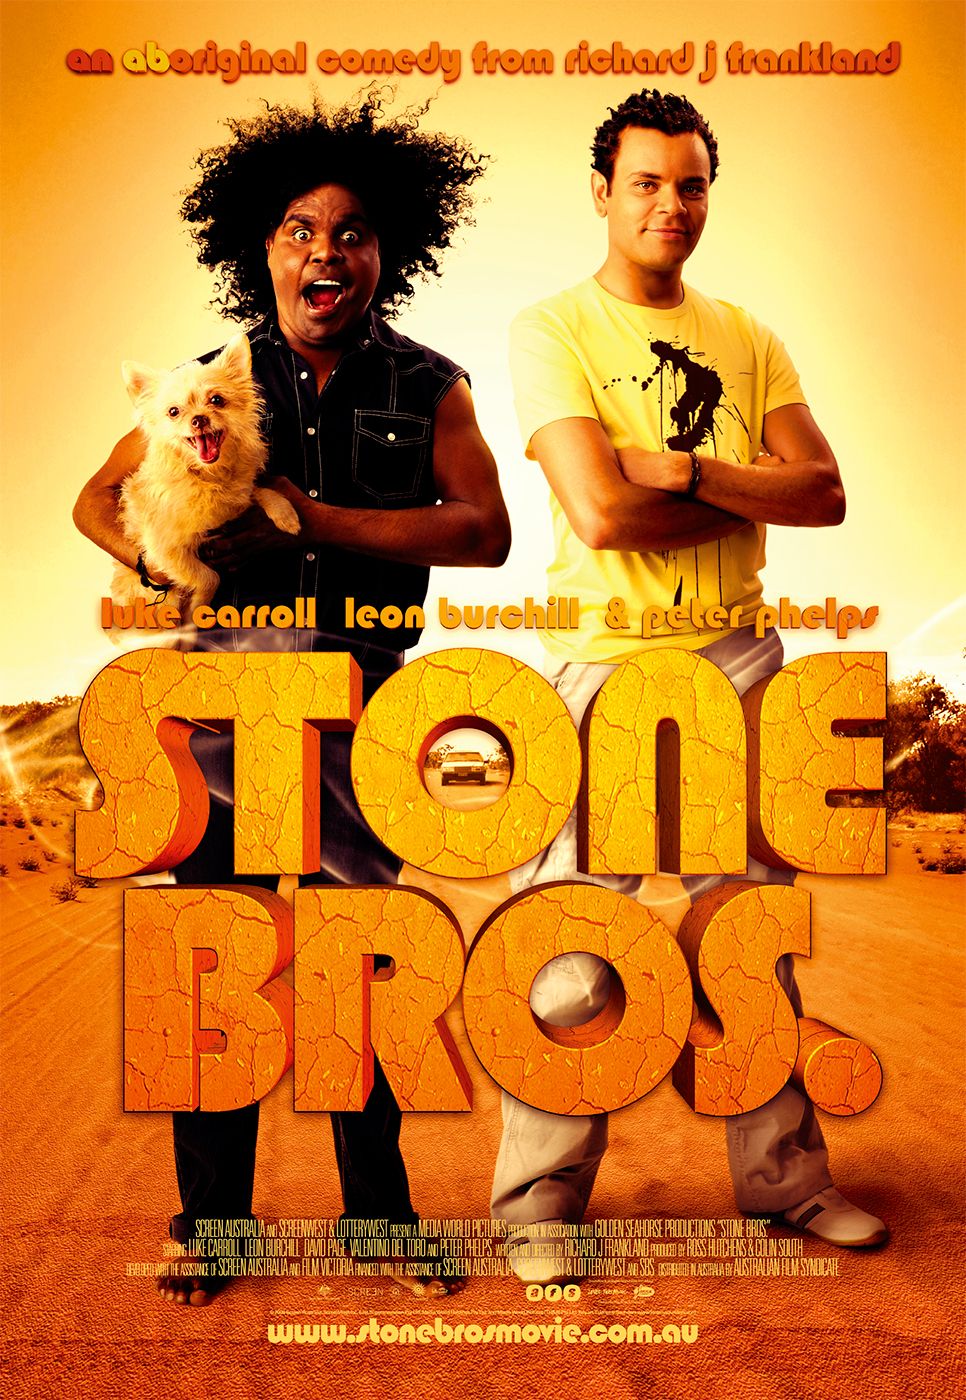 Extra Large Movie Poster Image for Stone Bros. 